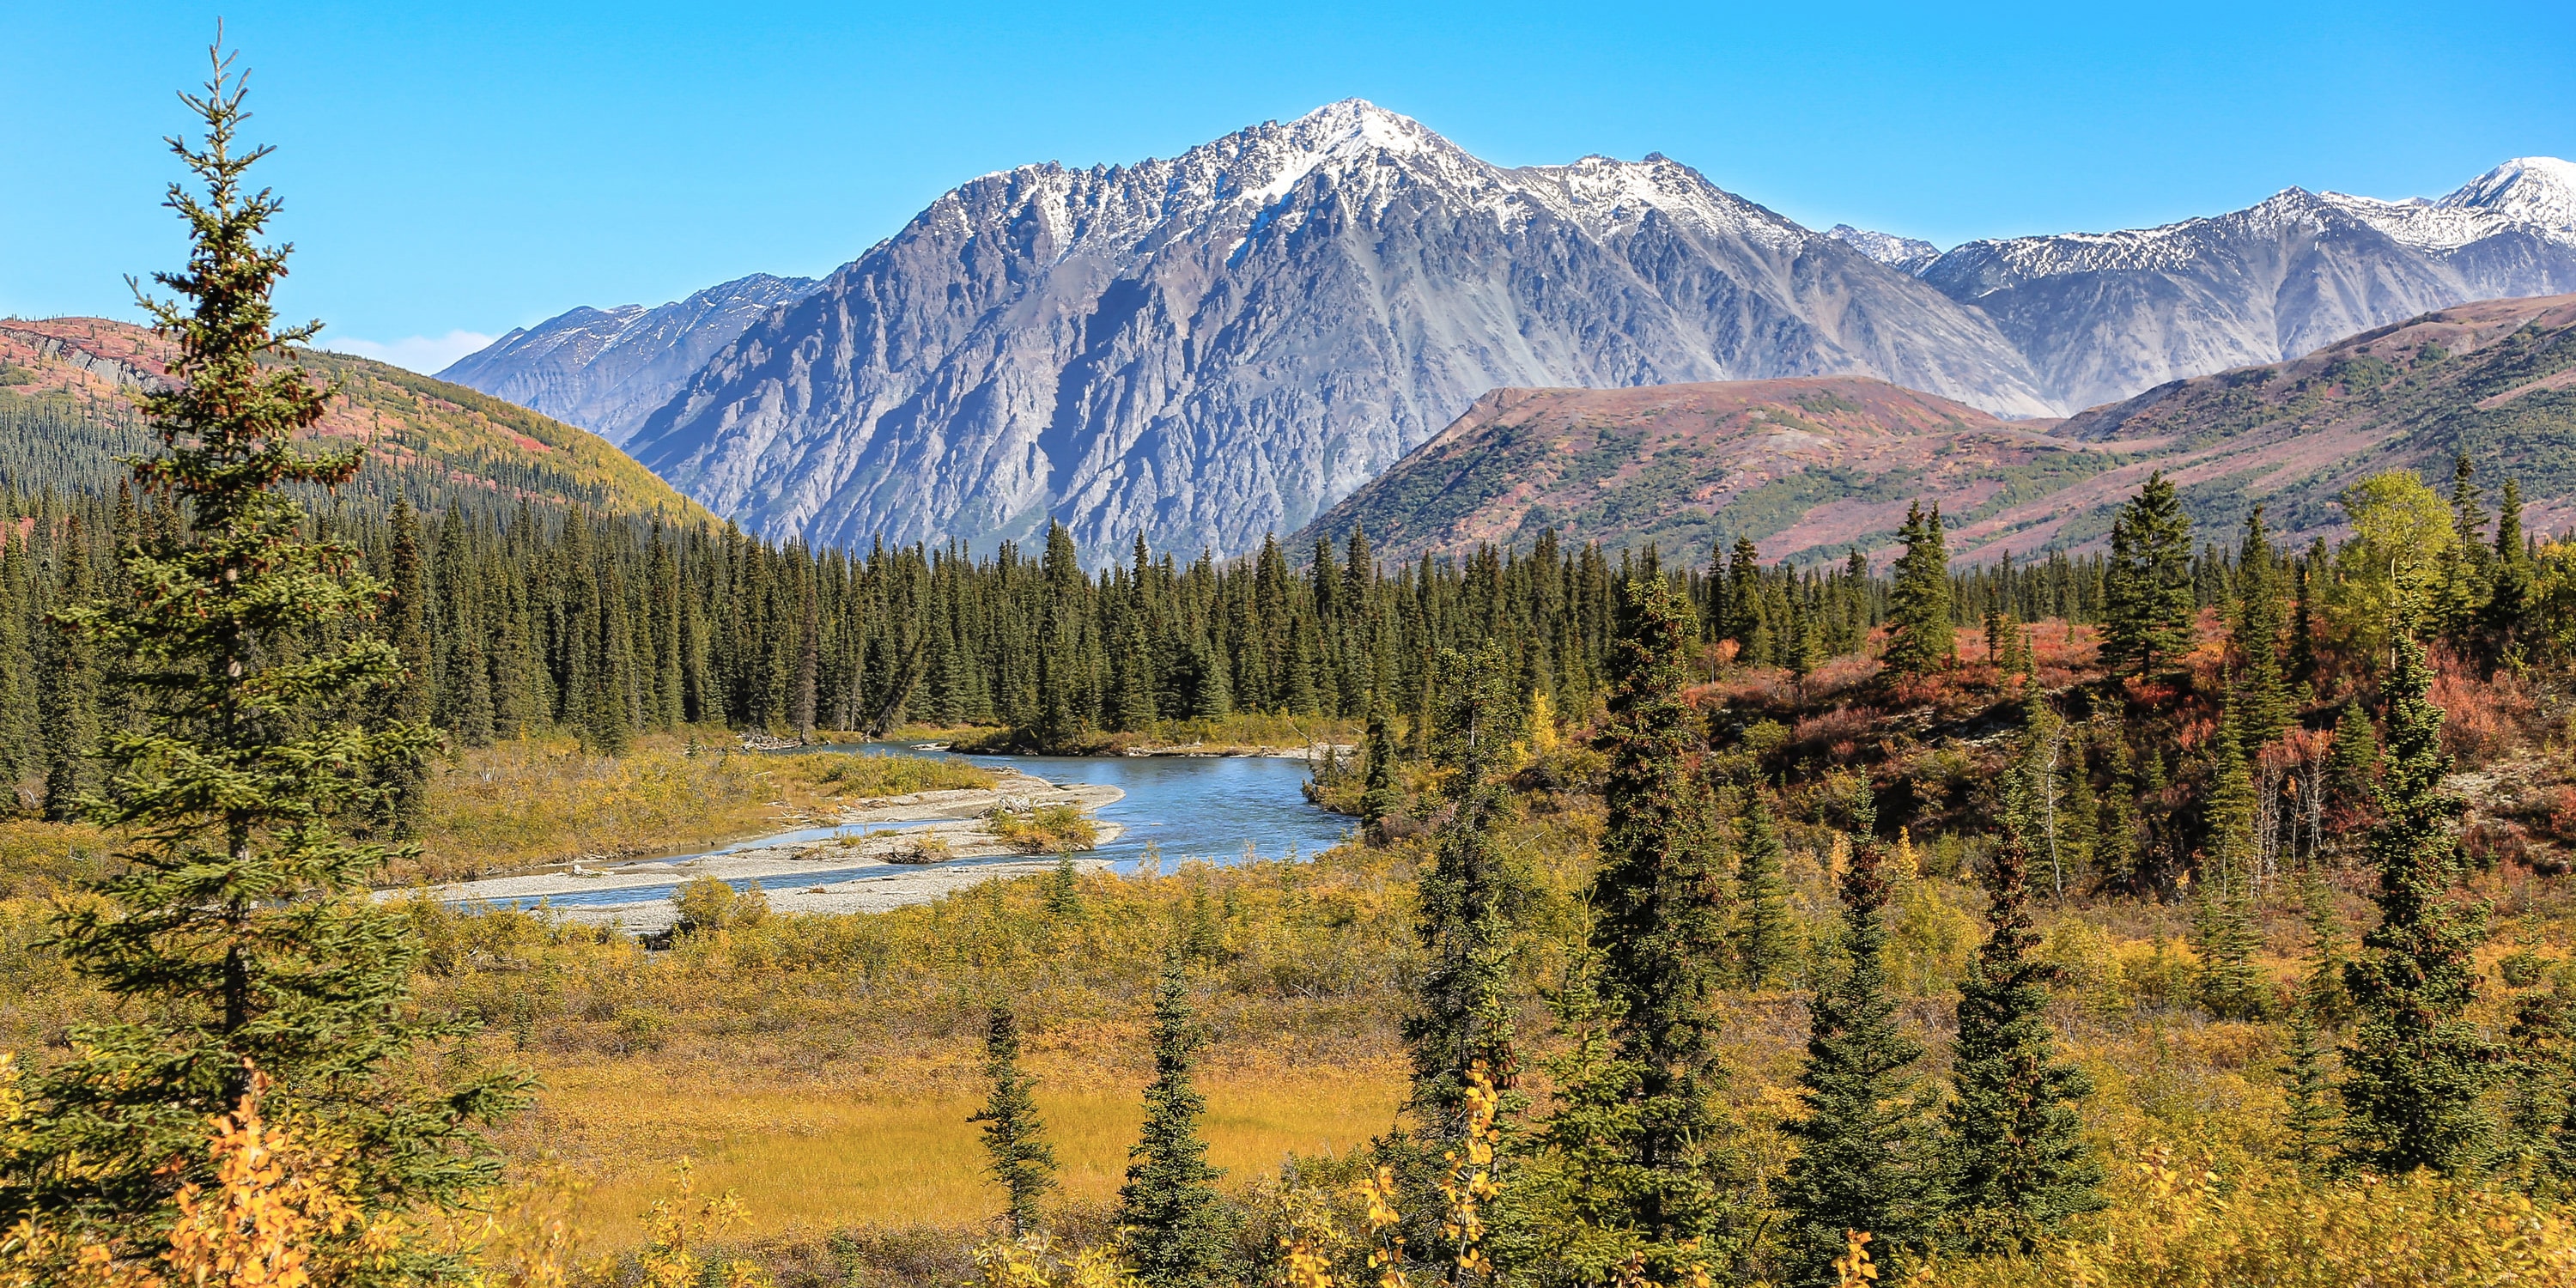 Denali National Park: Trip It or Skip It? - Scenic and Savvy